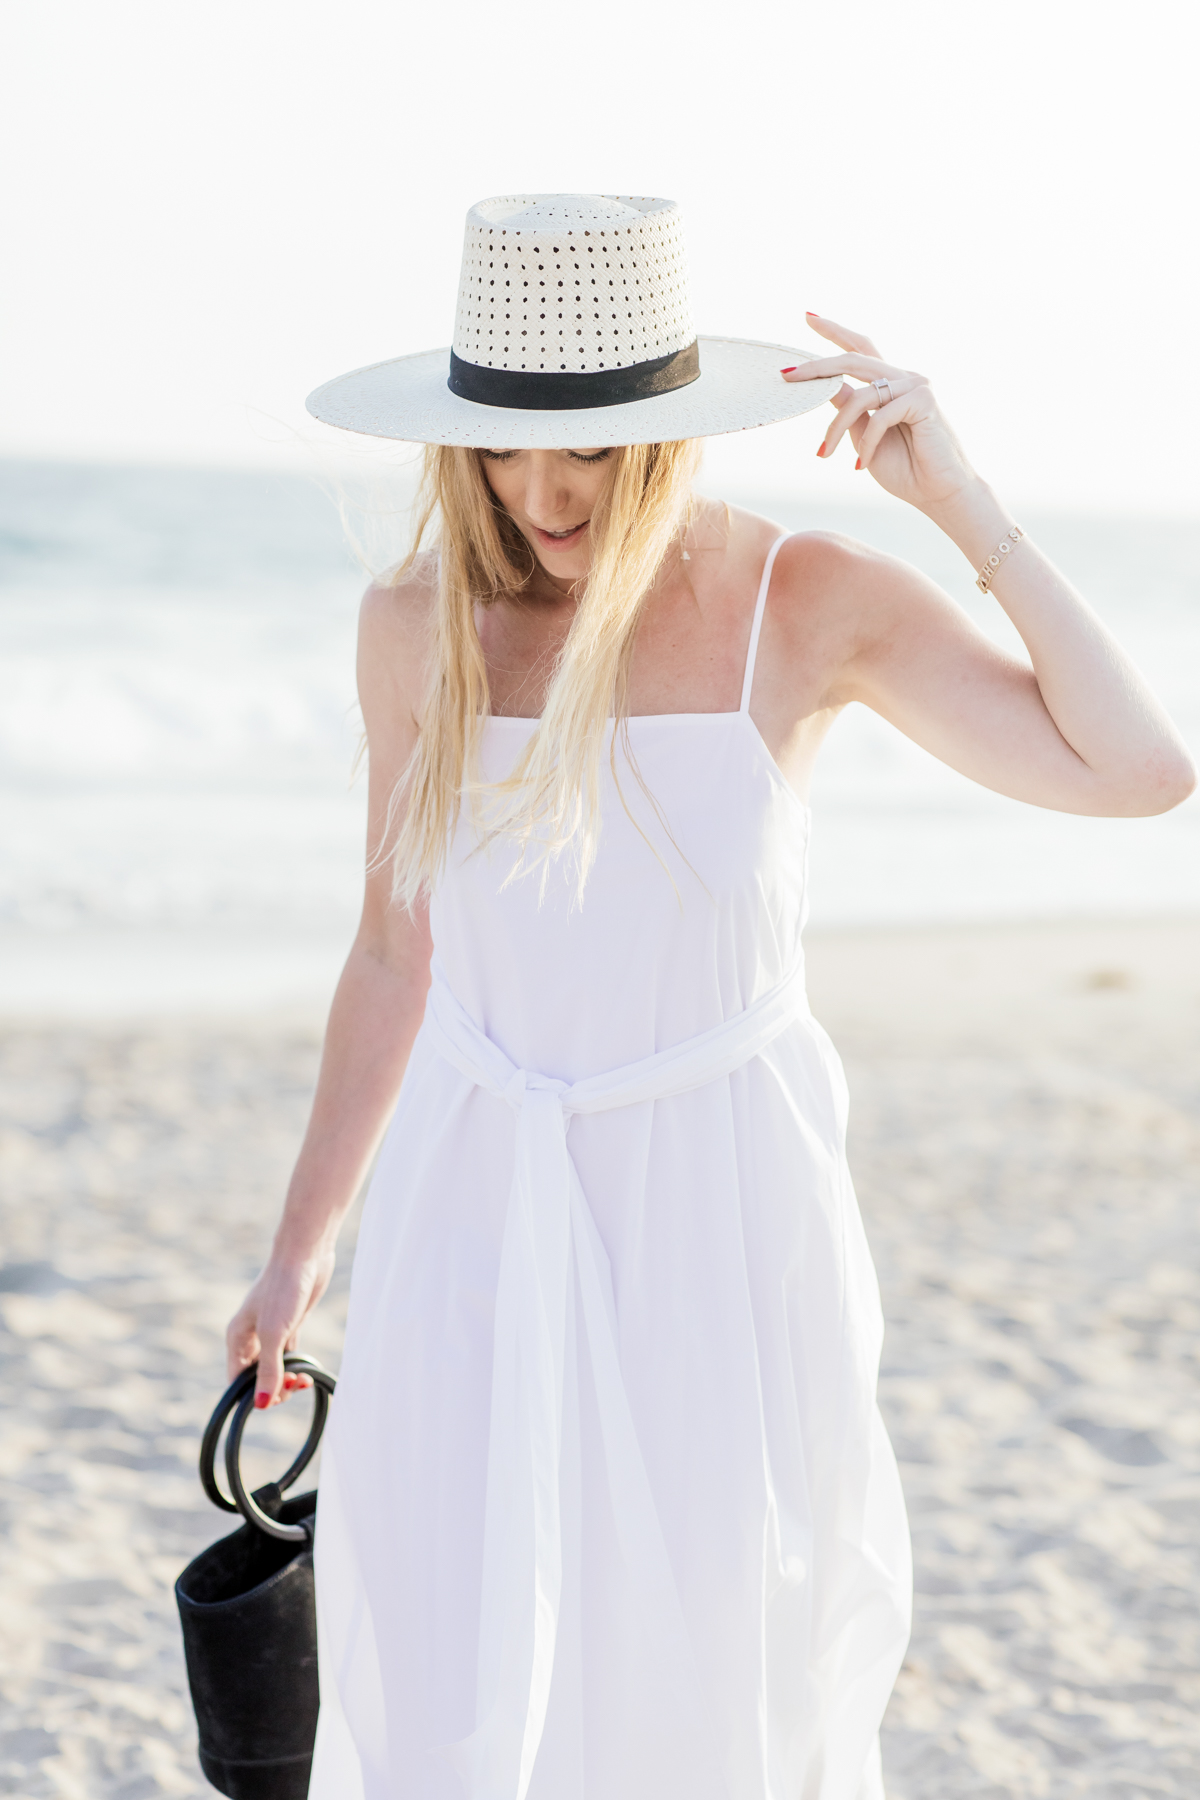 Forever Summer » eat.sleep.wear. – Fashion & Lifestyle Blog by Kimberly  Lapides